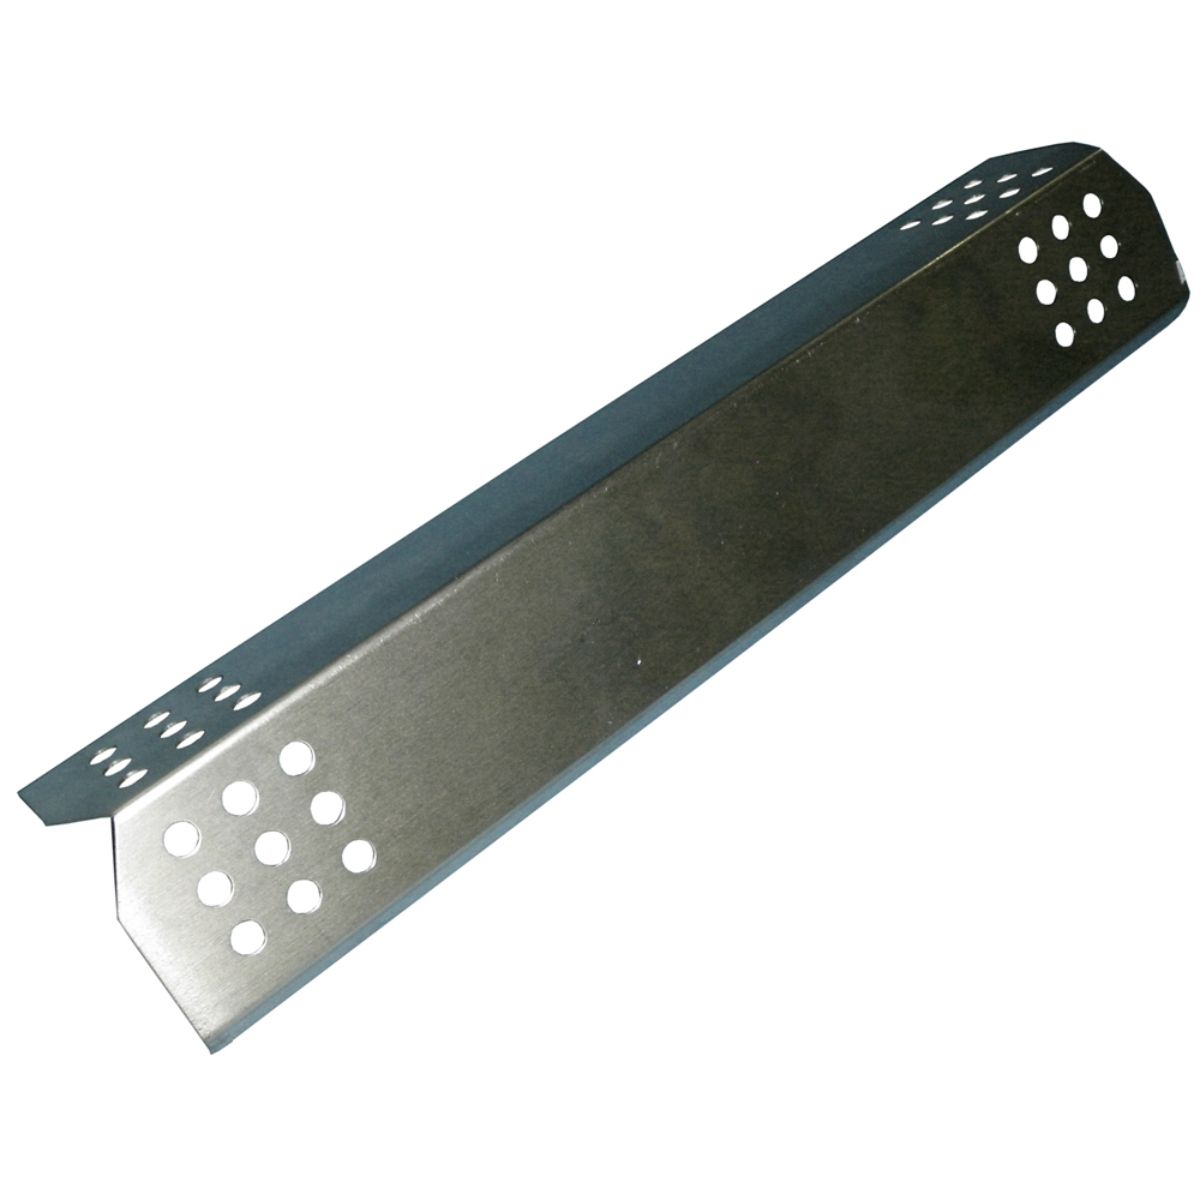 Stainless steel heat plate for Master Forge brand gas grills